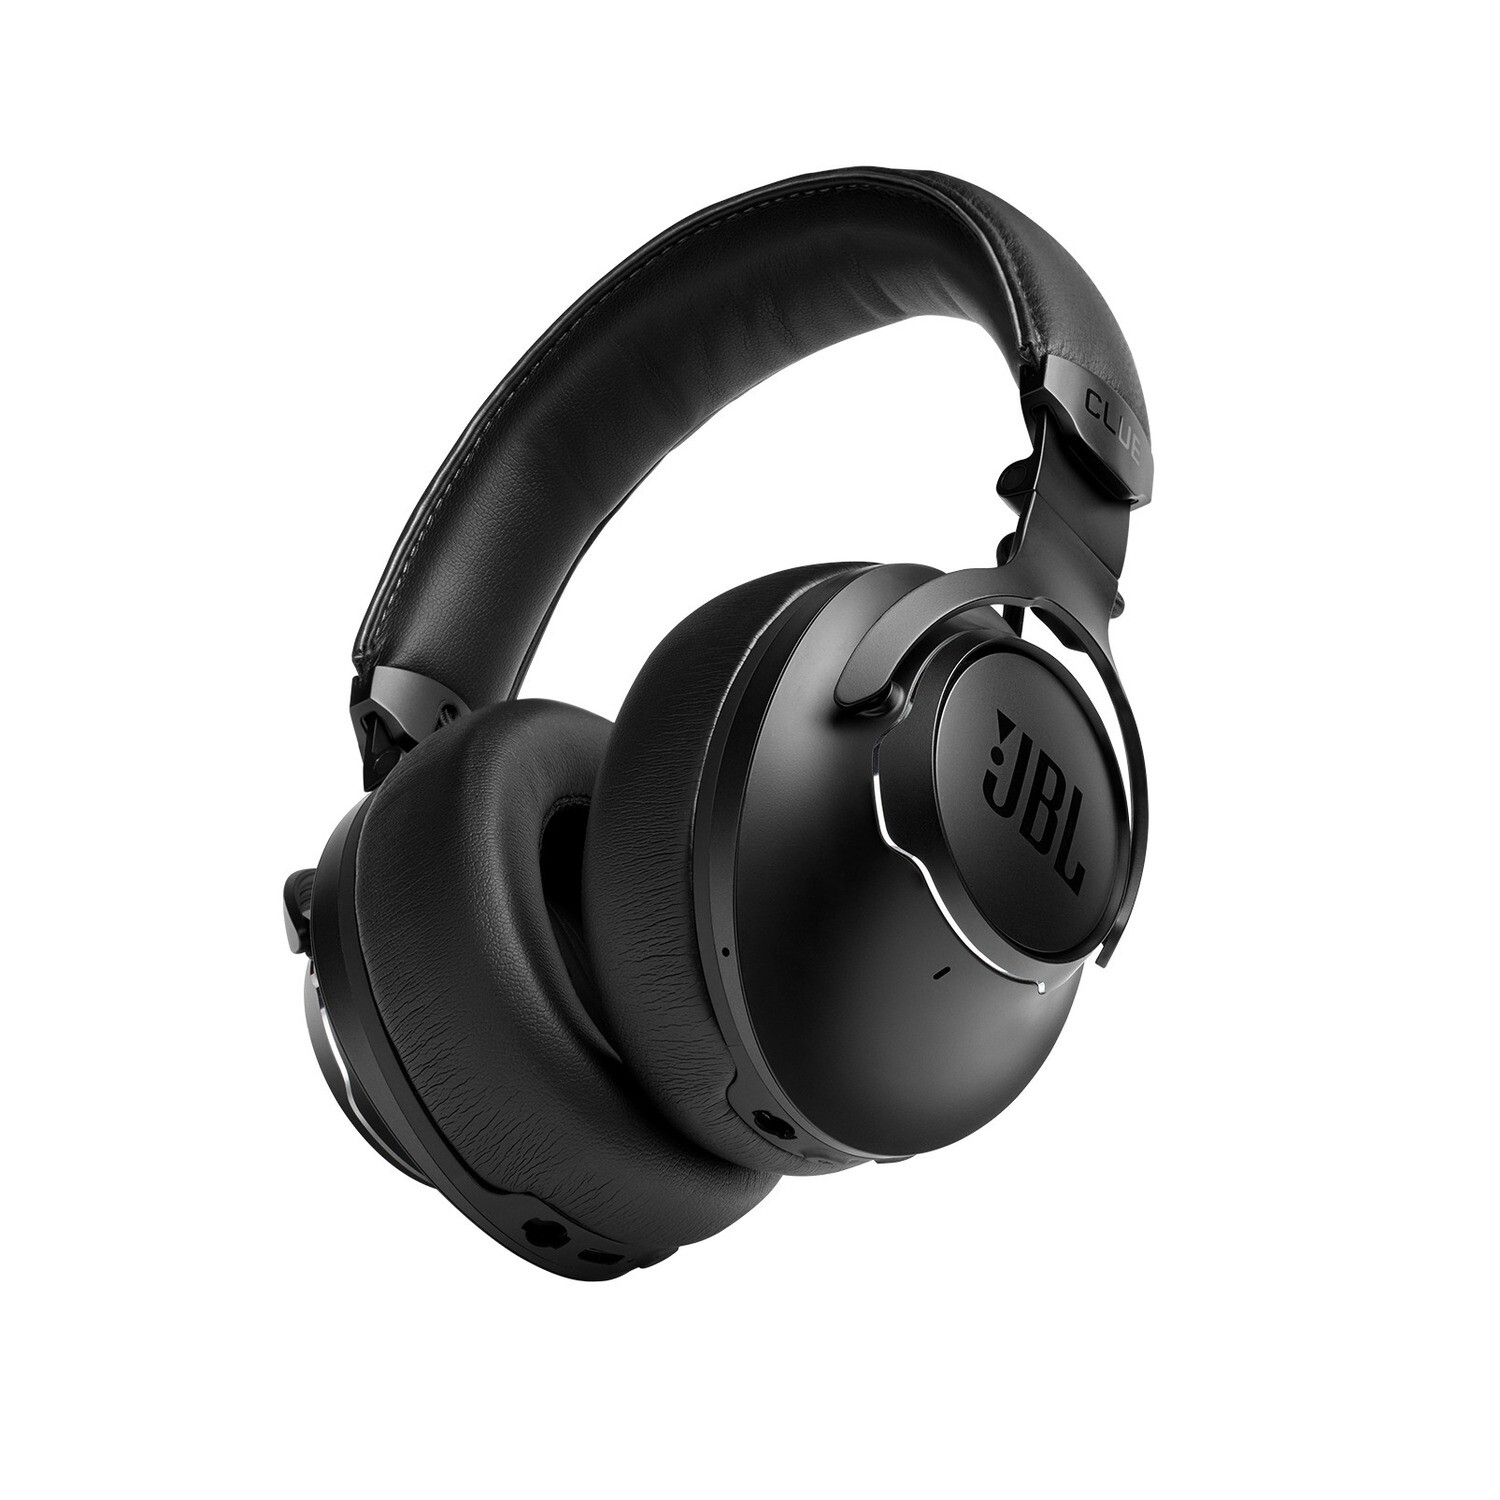 JBL CLUB ONE - Wireless, Over-Ear, True Adaptive Noise Cancelling Headphones Inspired by Pro Musicians